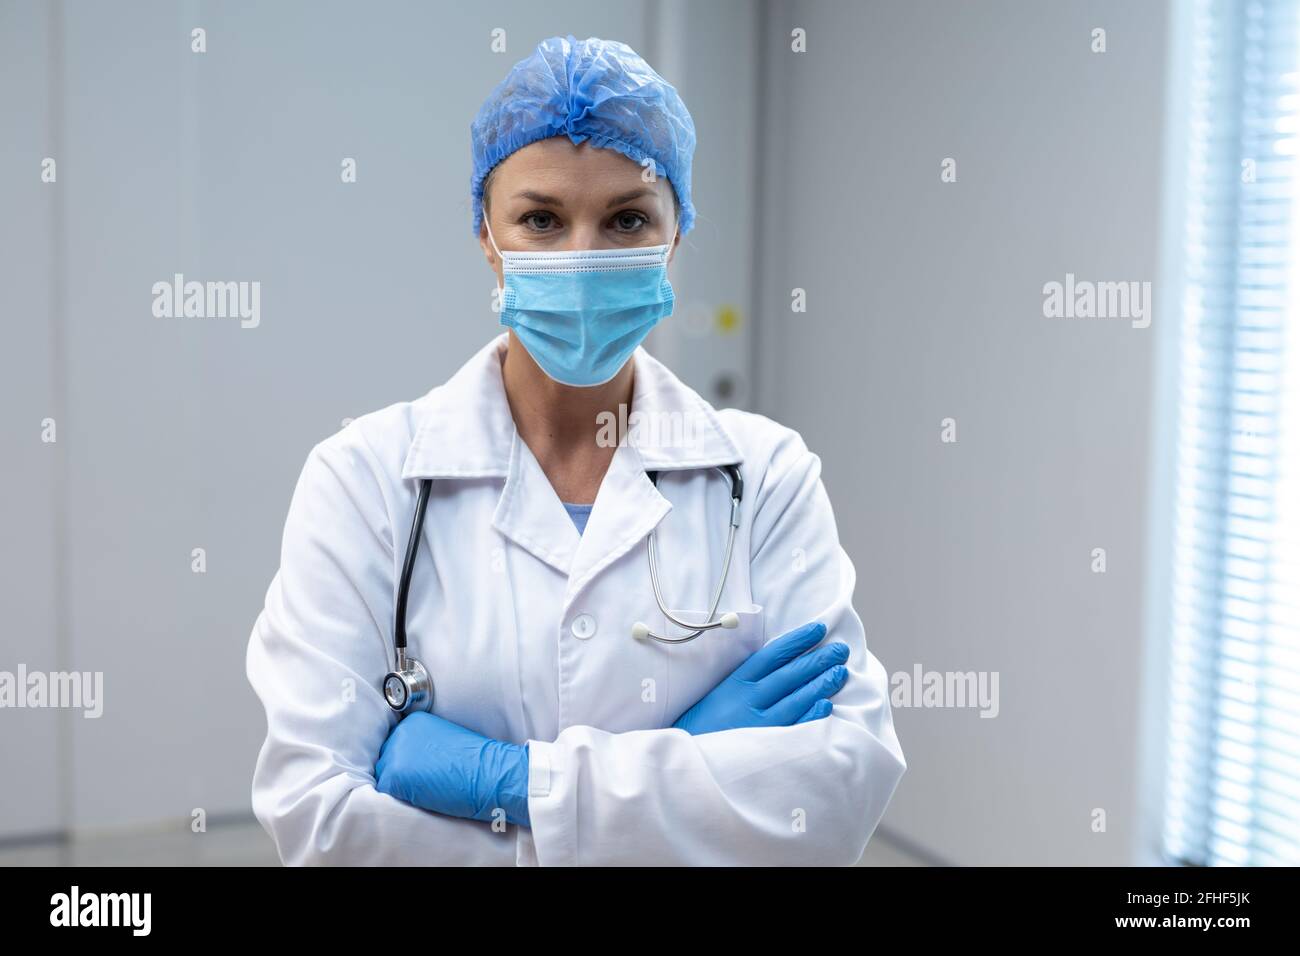 Portrait of caucasian female doctor wearing mask and latex gloves Stock Photo